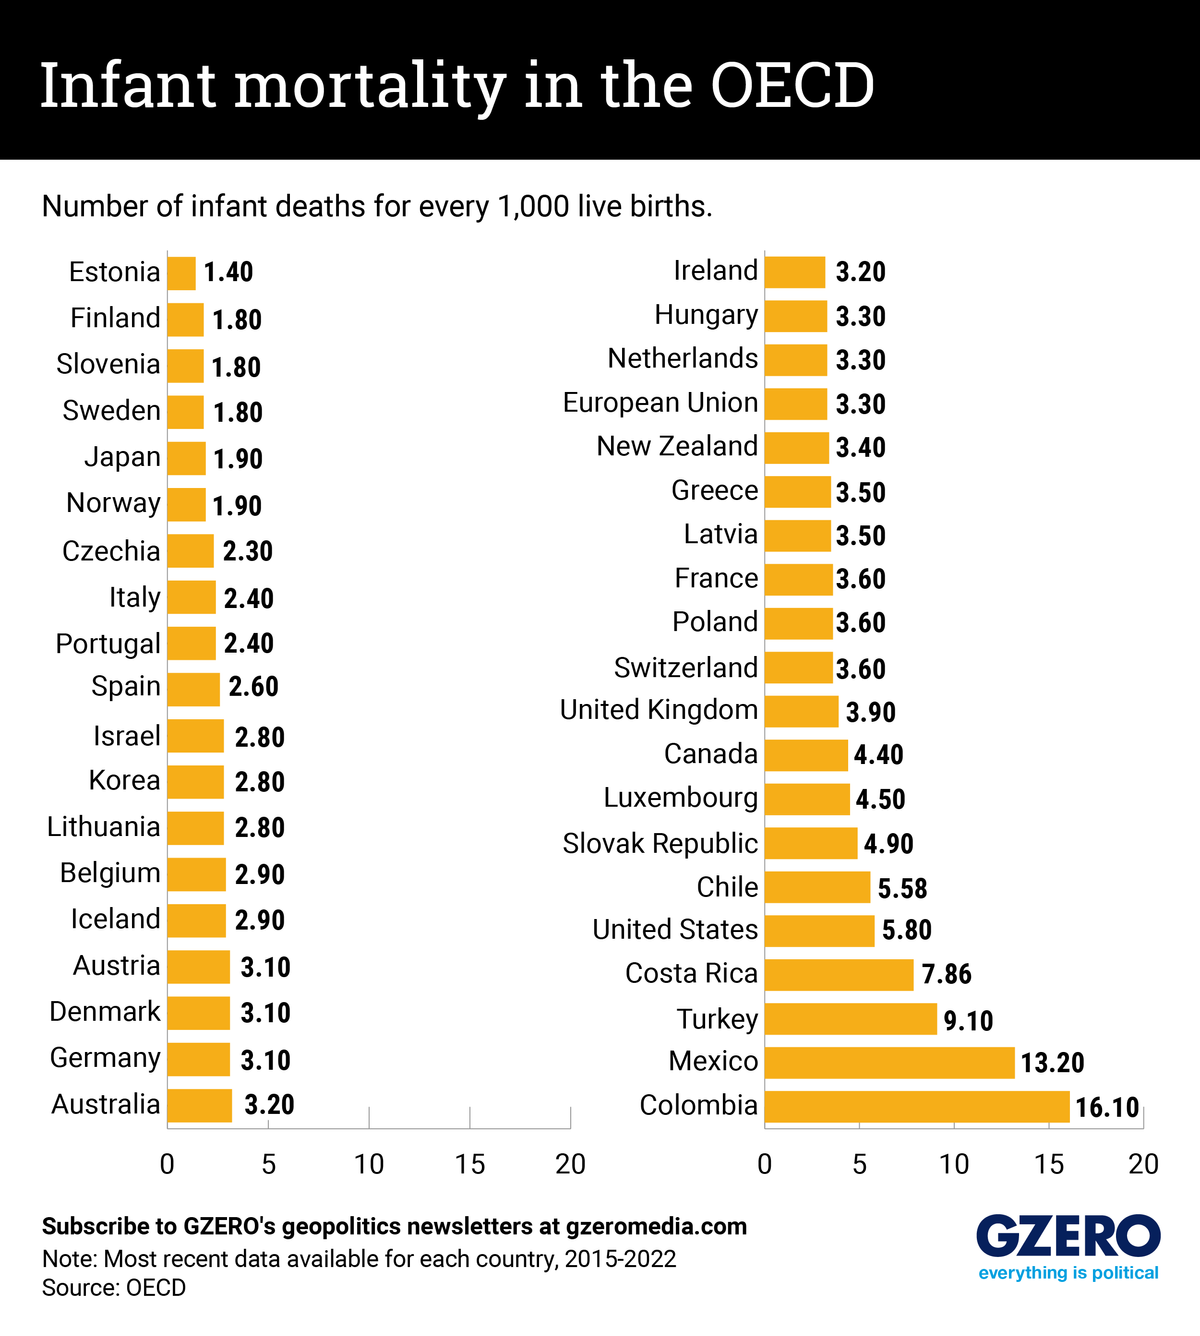 Graphic Truth: Infant mortality in the OECD